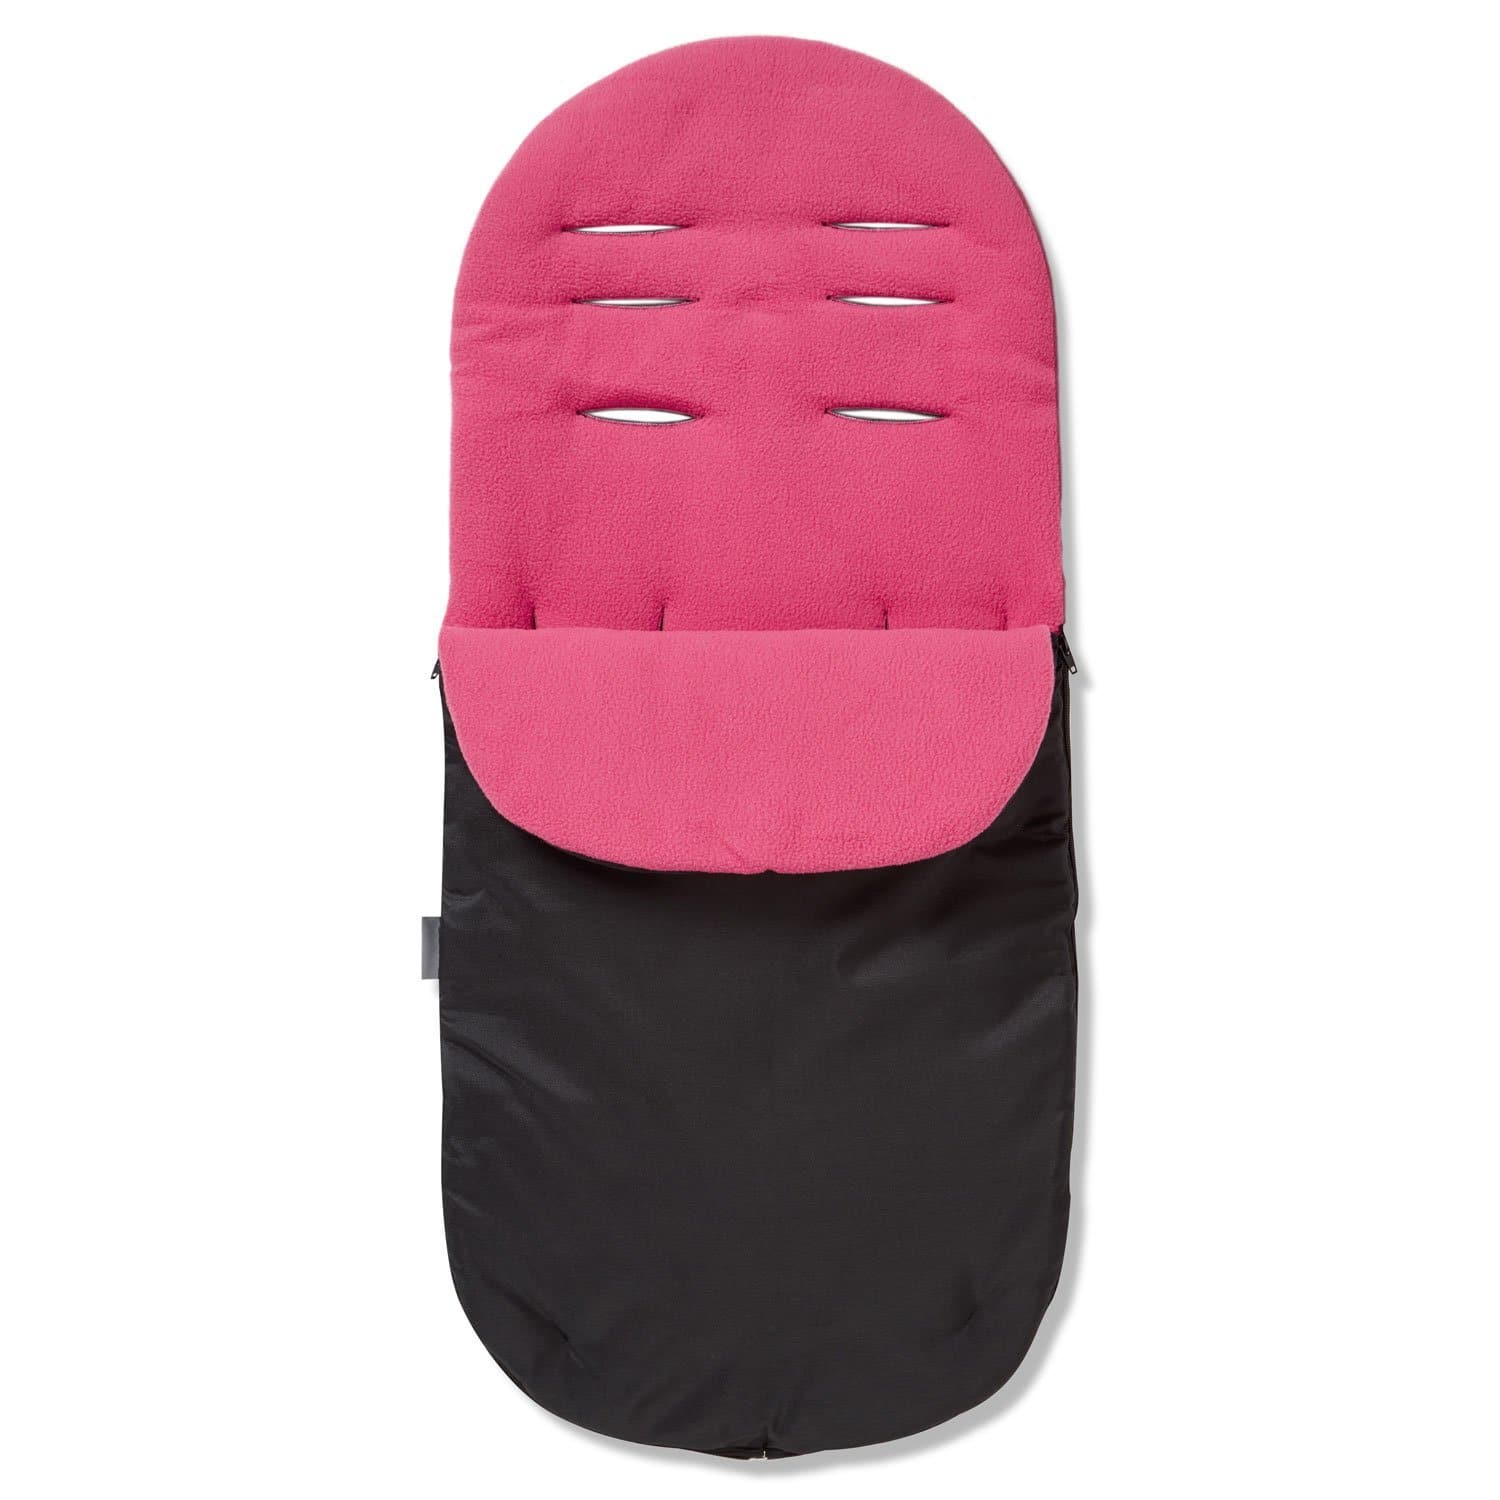 Footmuff / Cosy Toes Compatible with BabyDan - For Your Little One